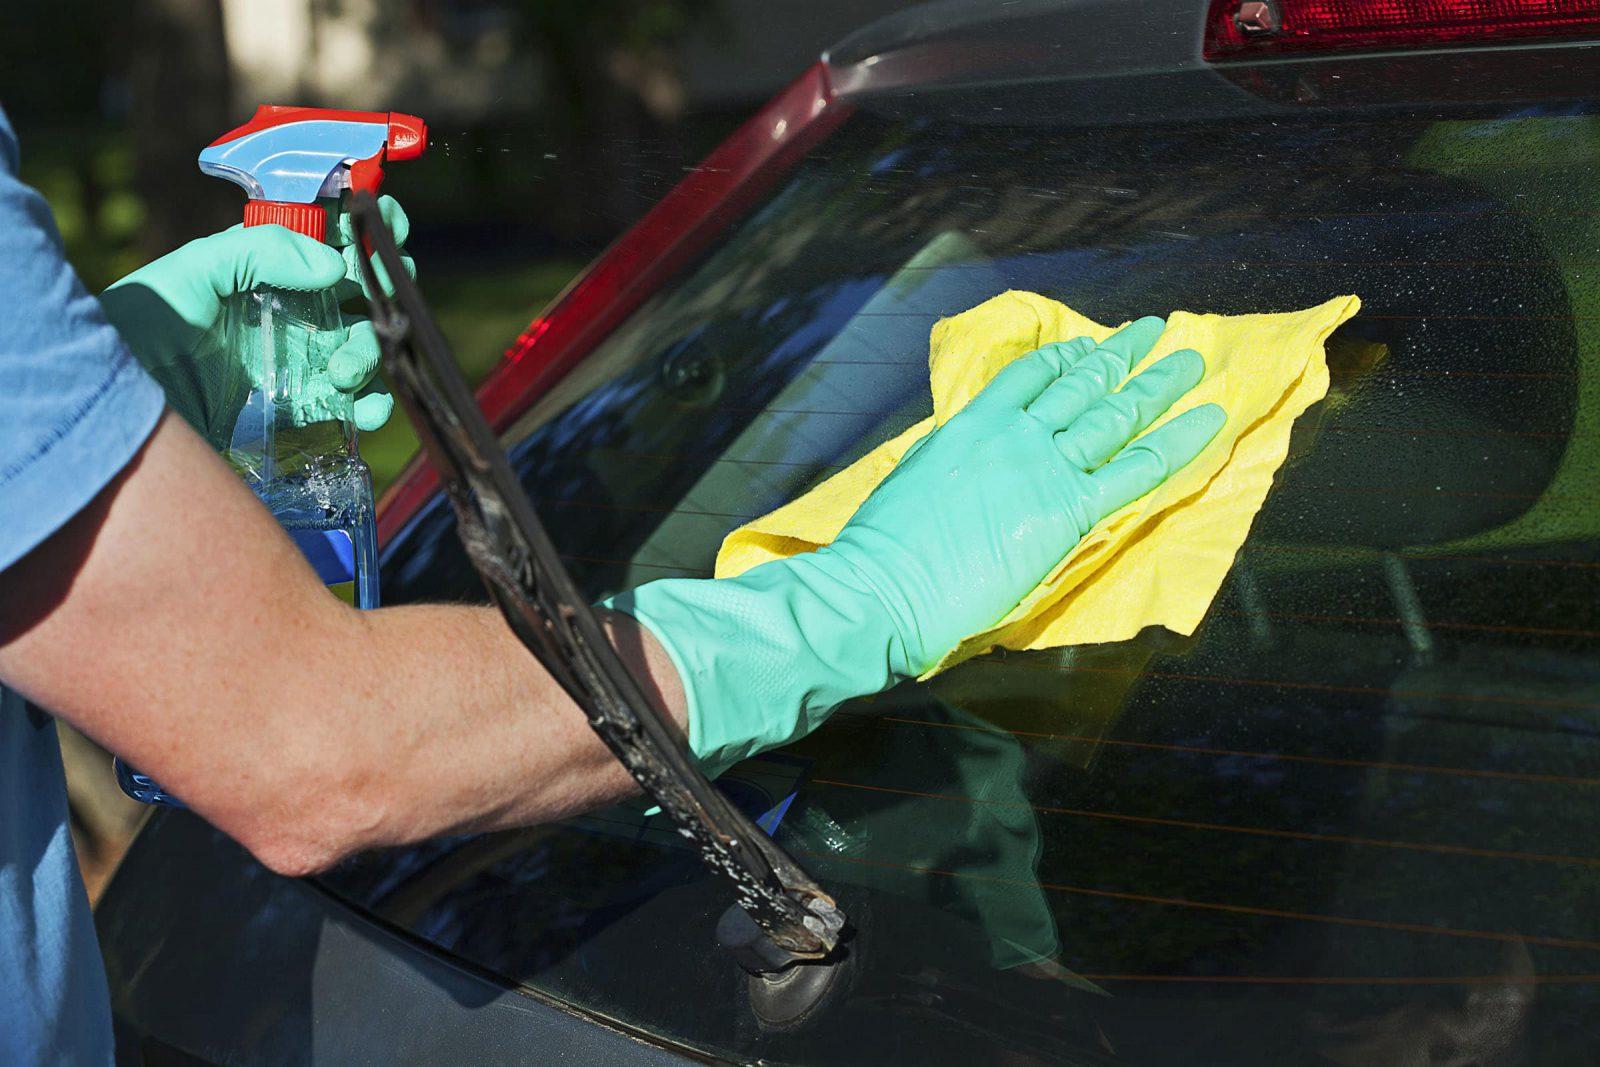 Go for homemade windshield washer fluid